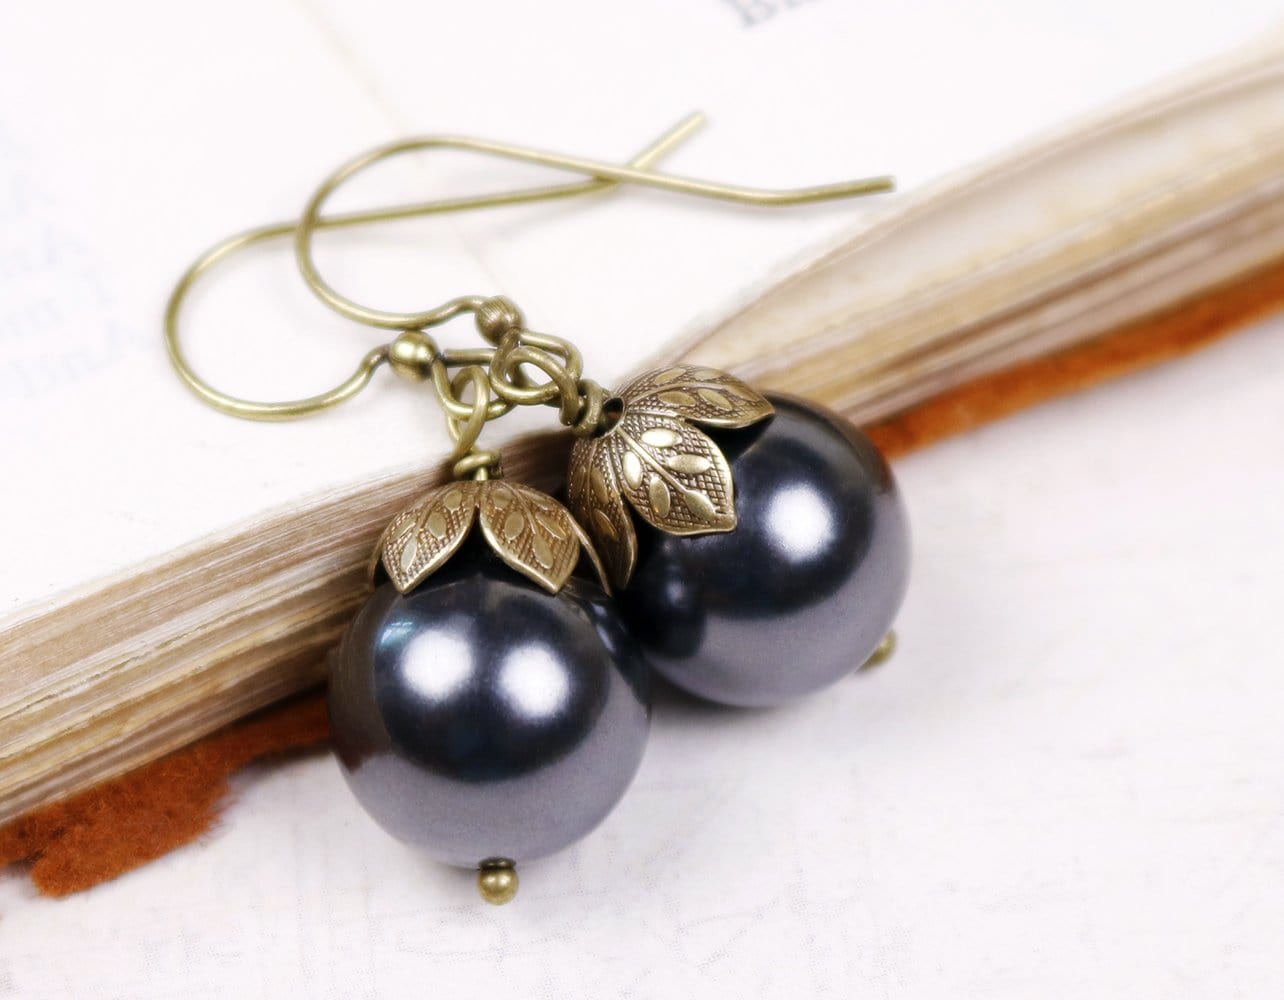 Aquitaine Pearl Drop Earrings in Black Pearl and Antiqued Brass by Rabbitwood and Reason